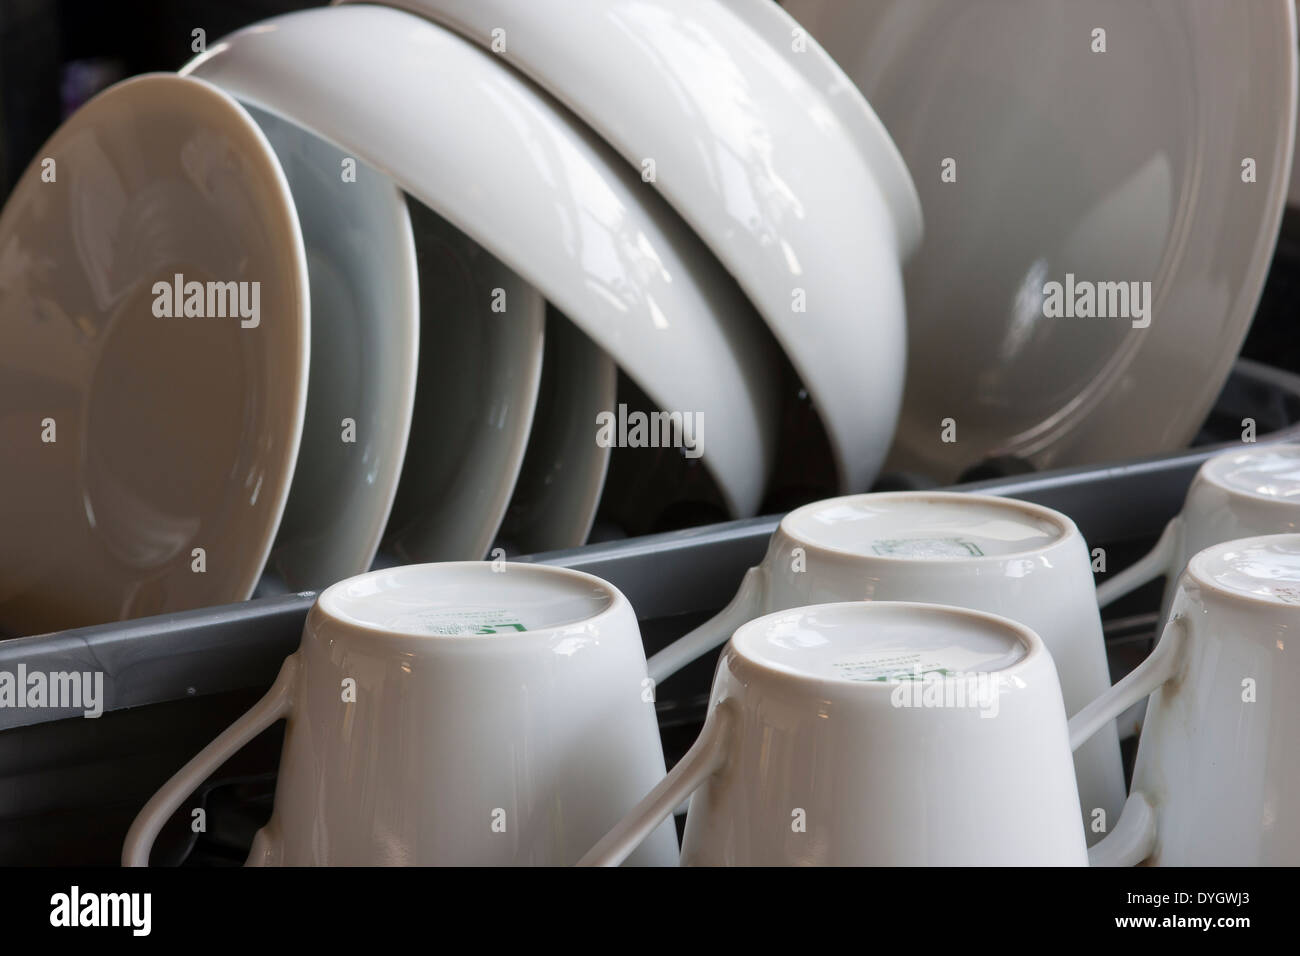 White crockery drying on draining board in kitchen Stock Photo